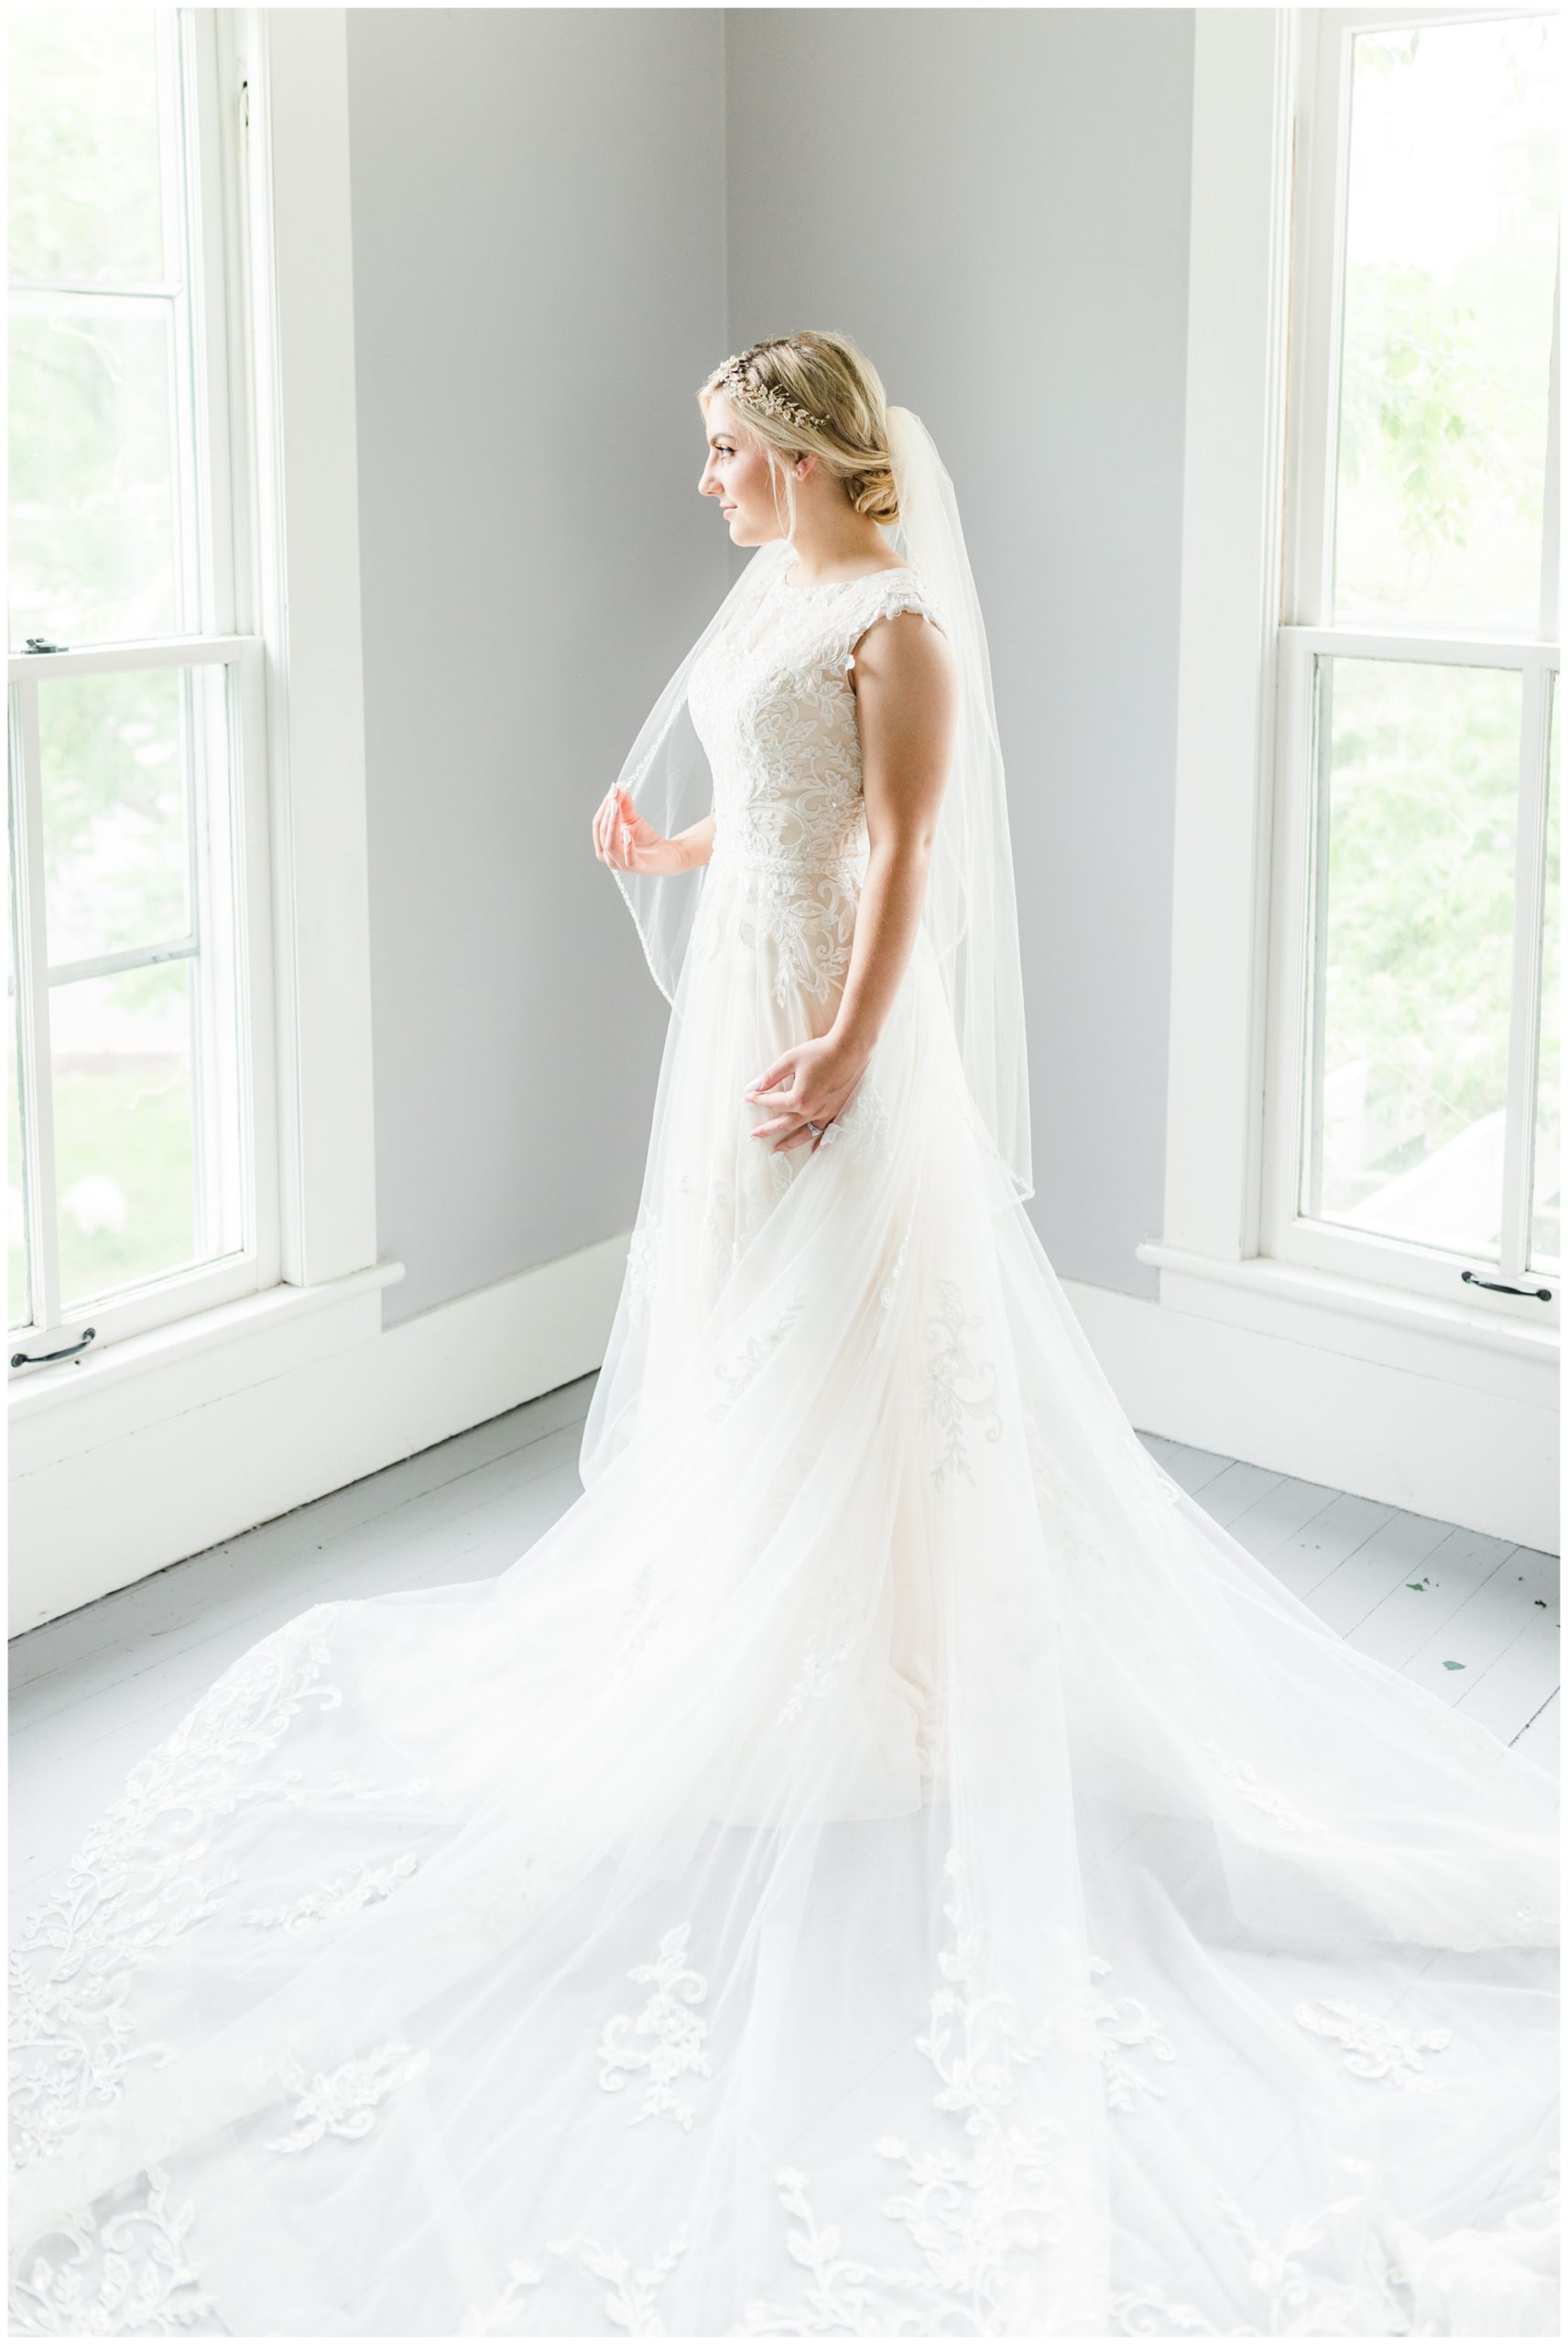 The bride stands in her white lace gown in front of a window. She holds her veil in her fingertips. 